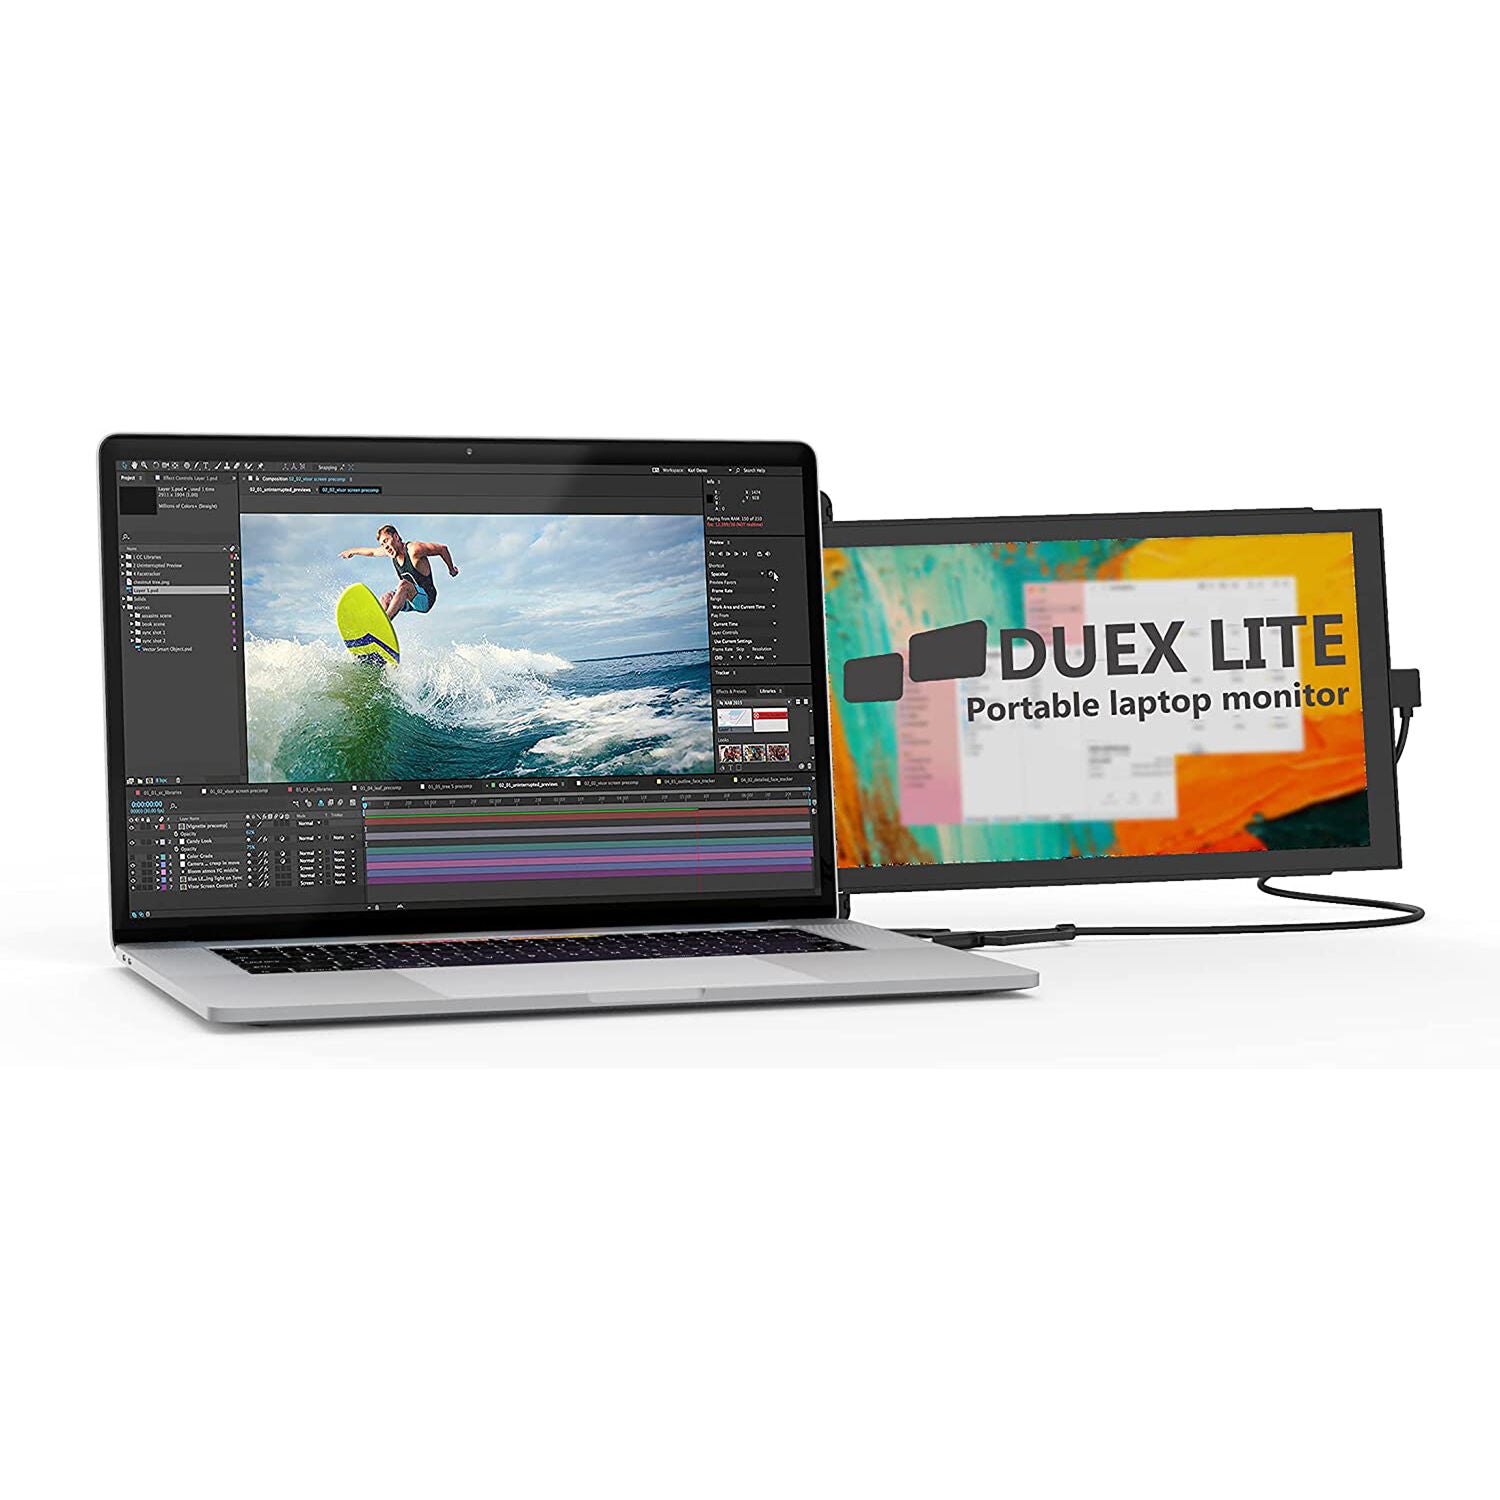 Mobile Pixels MPDUEXLITE-RB-B 12.5" Duex Lite Portable Monitor Windows/Apple Compatible - Certified Refurbished